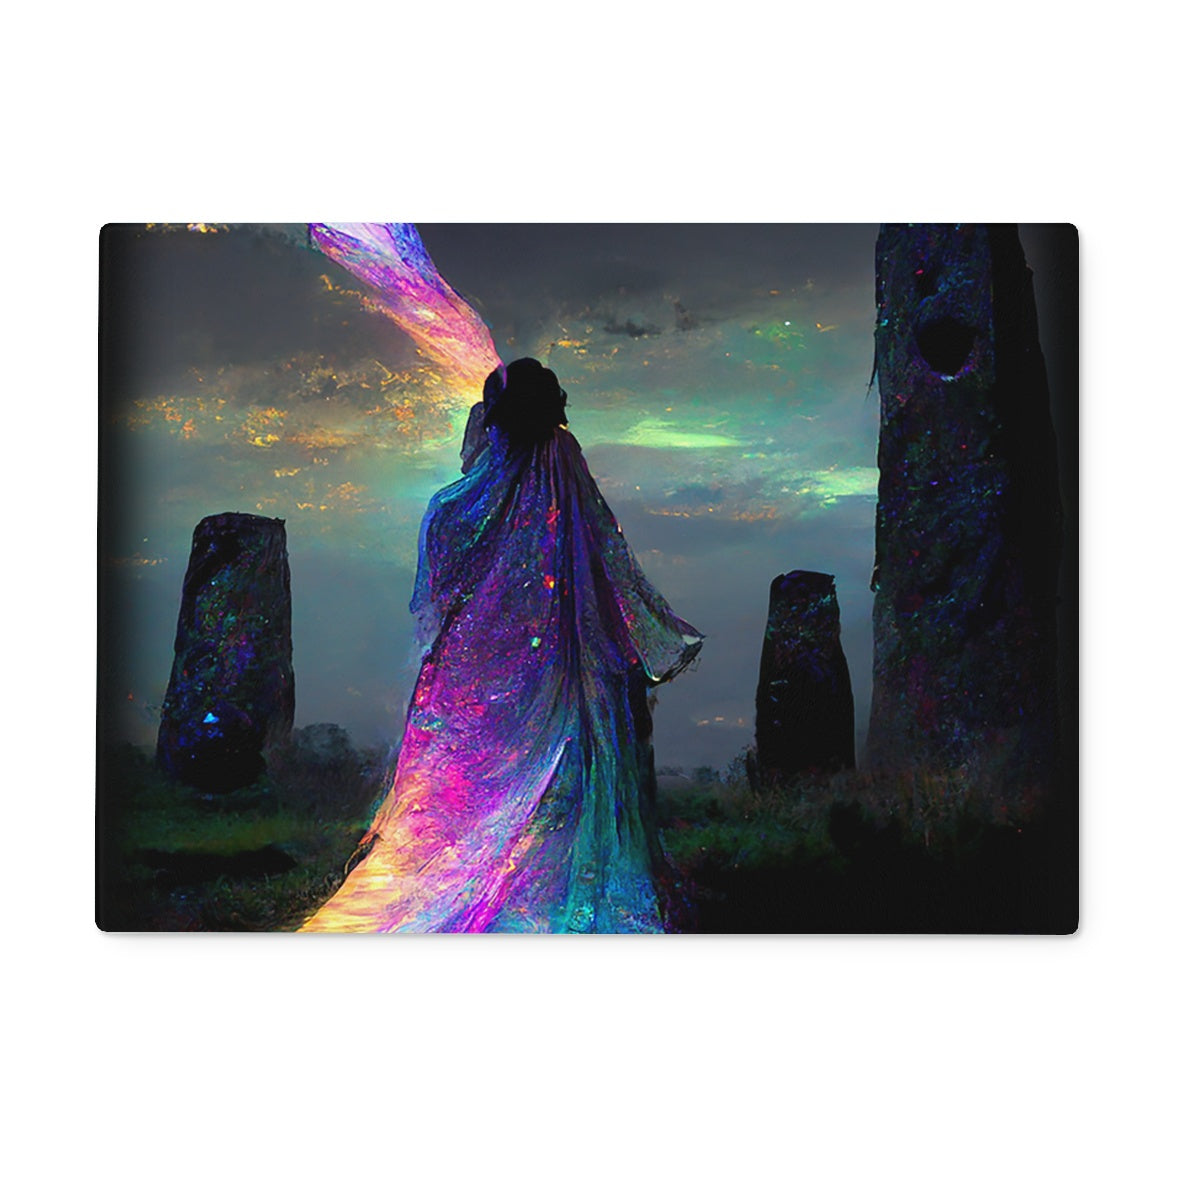 Iridescent energy fairy amongst ancient standing stones 1 Glass Chopping Board